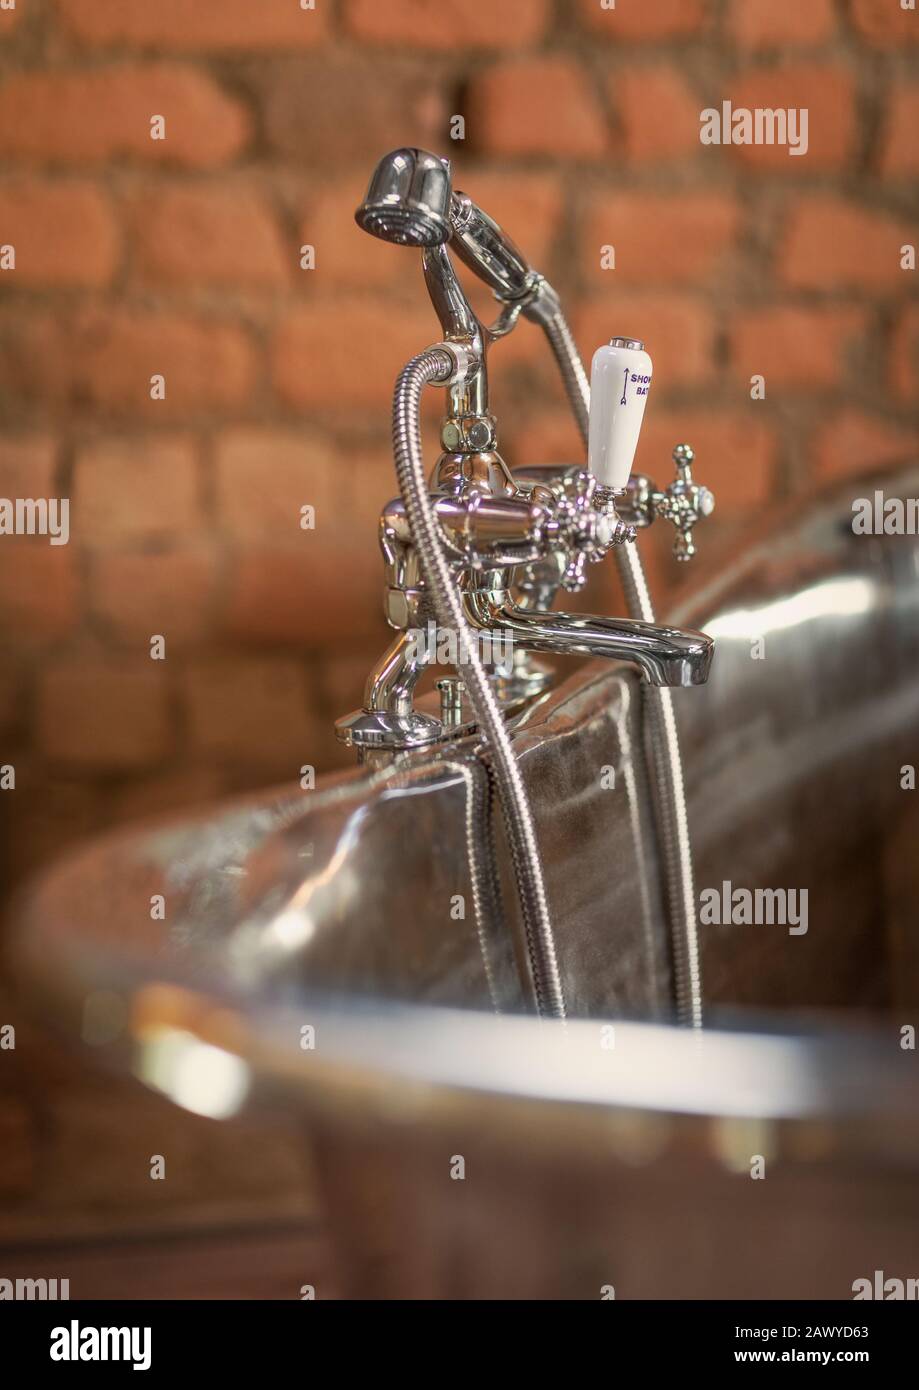 Home showcase interior stainless steel soaking tub faucet Stock Photo